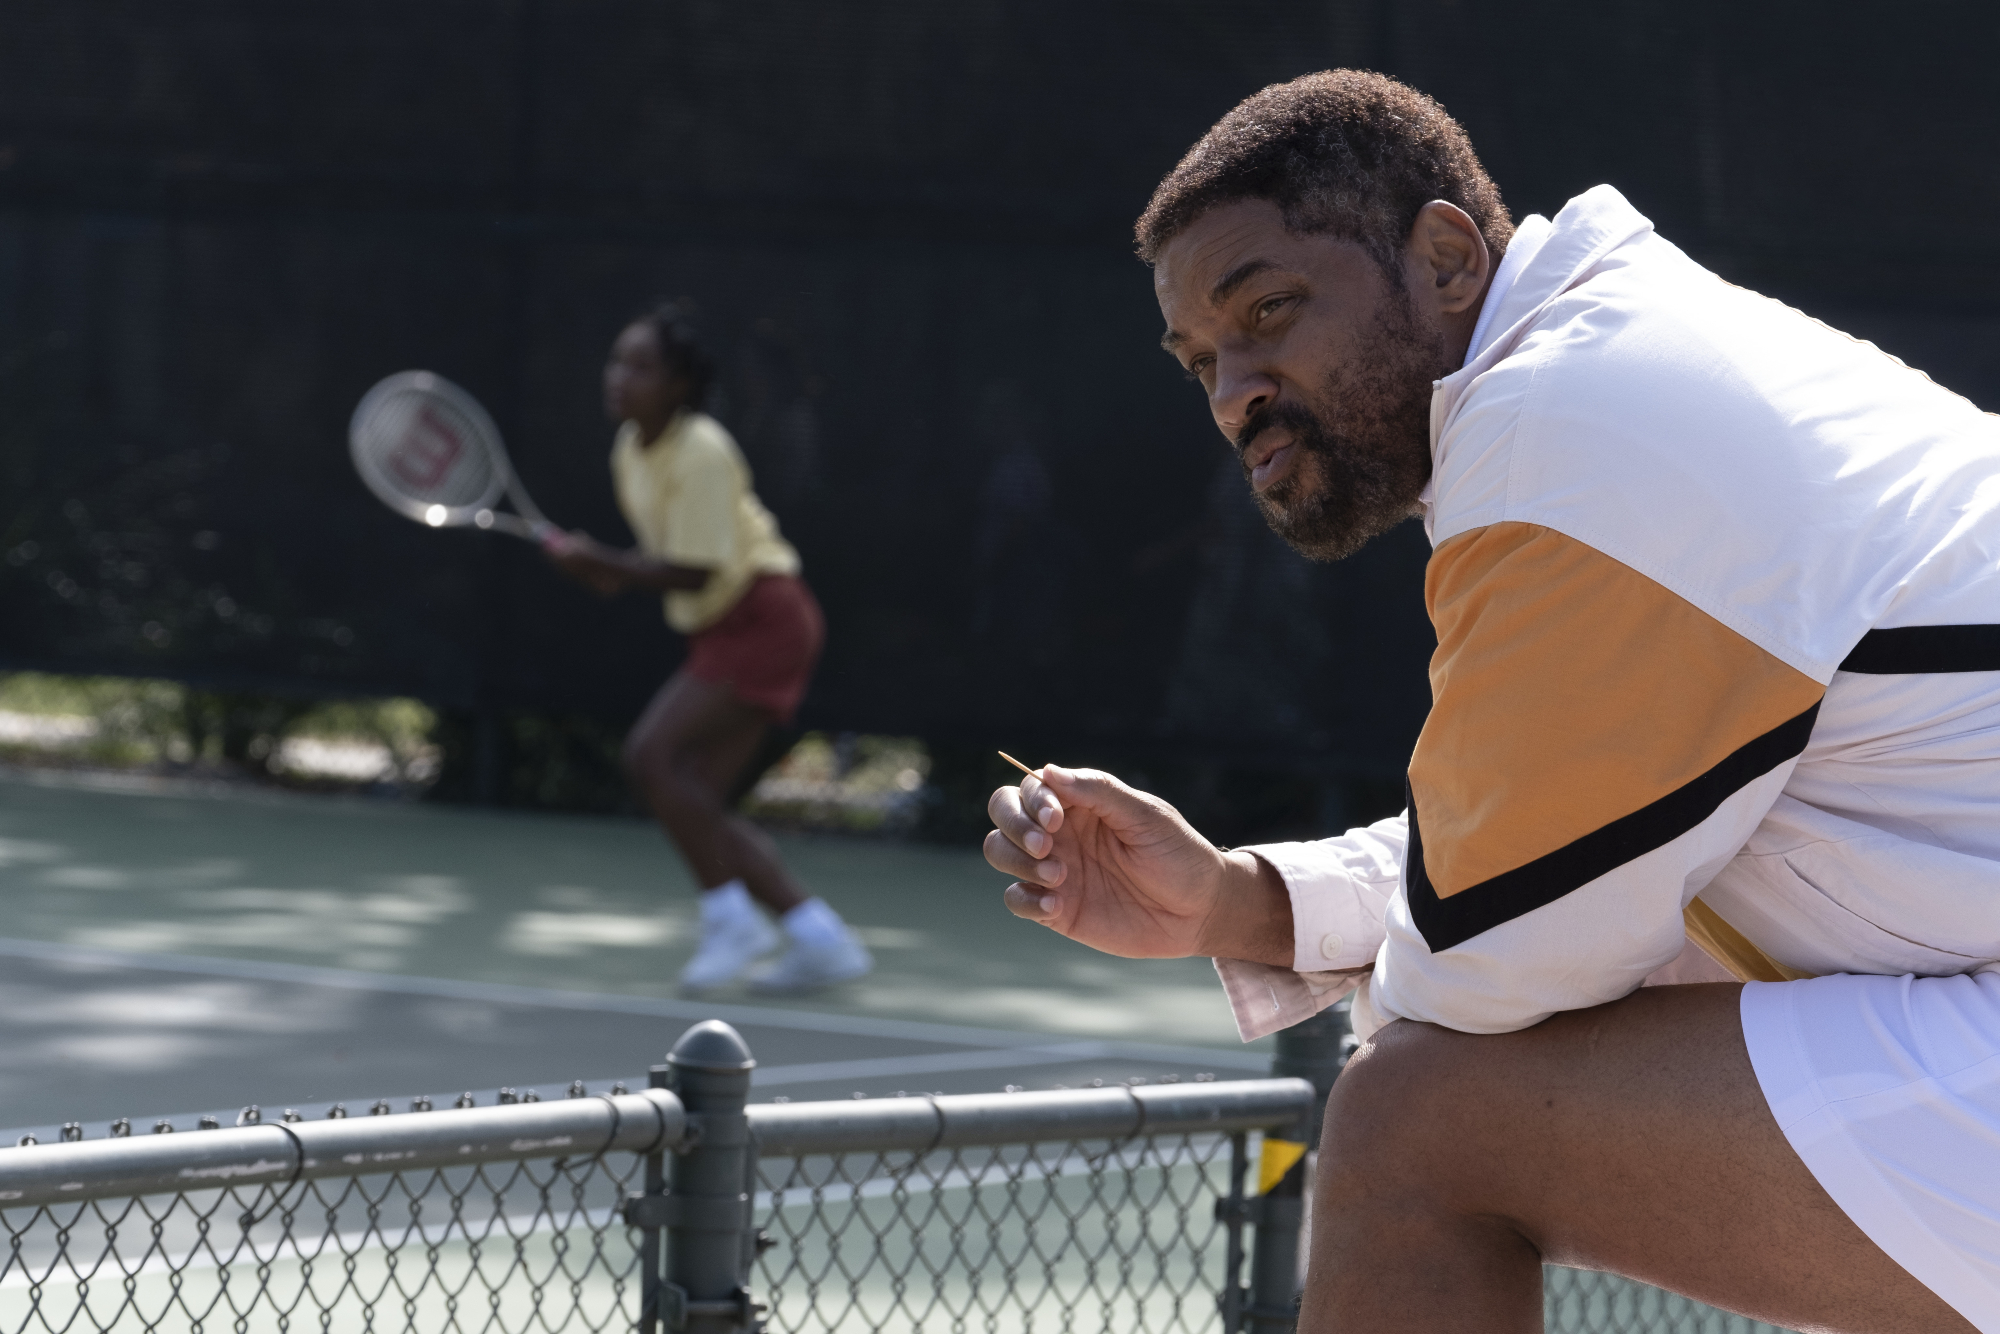 'King Richard' review starring Saniyya Sidney as Venus Williams and Will Smith as Richard Williams with Richard sitting in the foreground with Venus playing tennis in the background